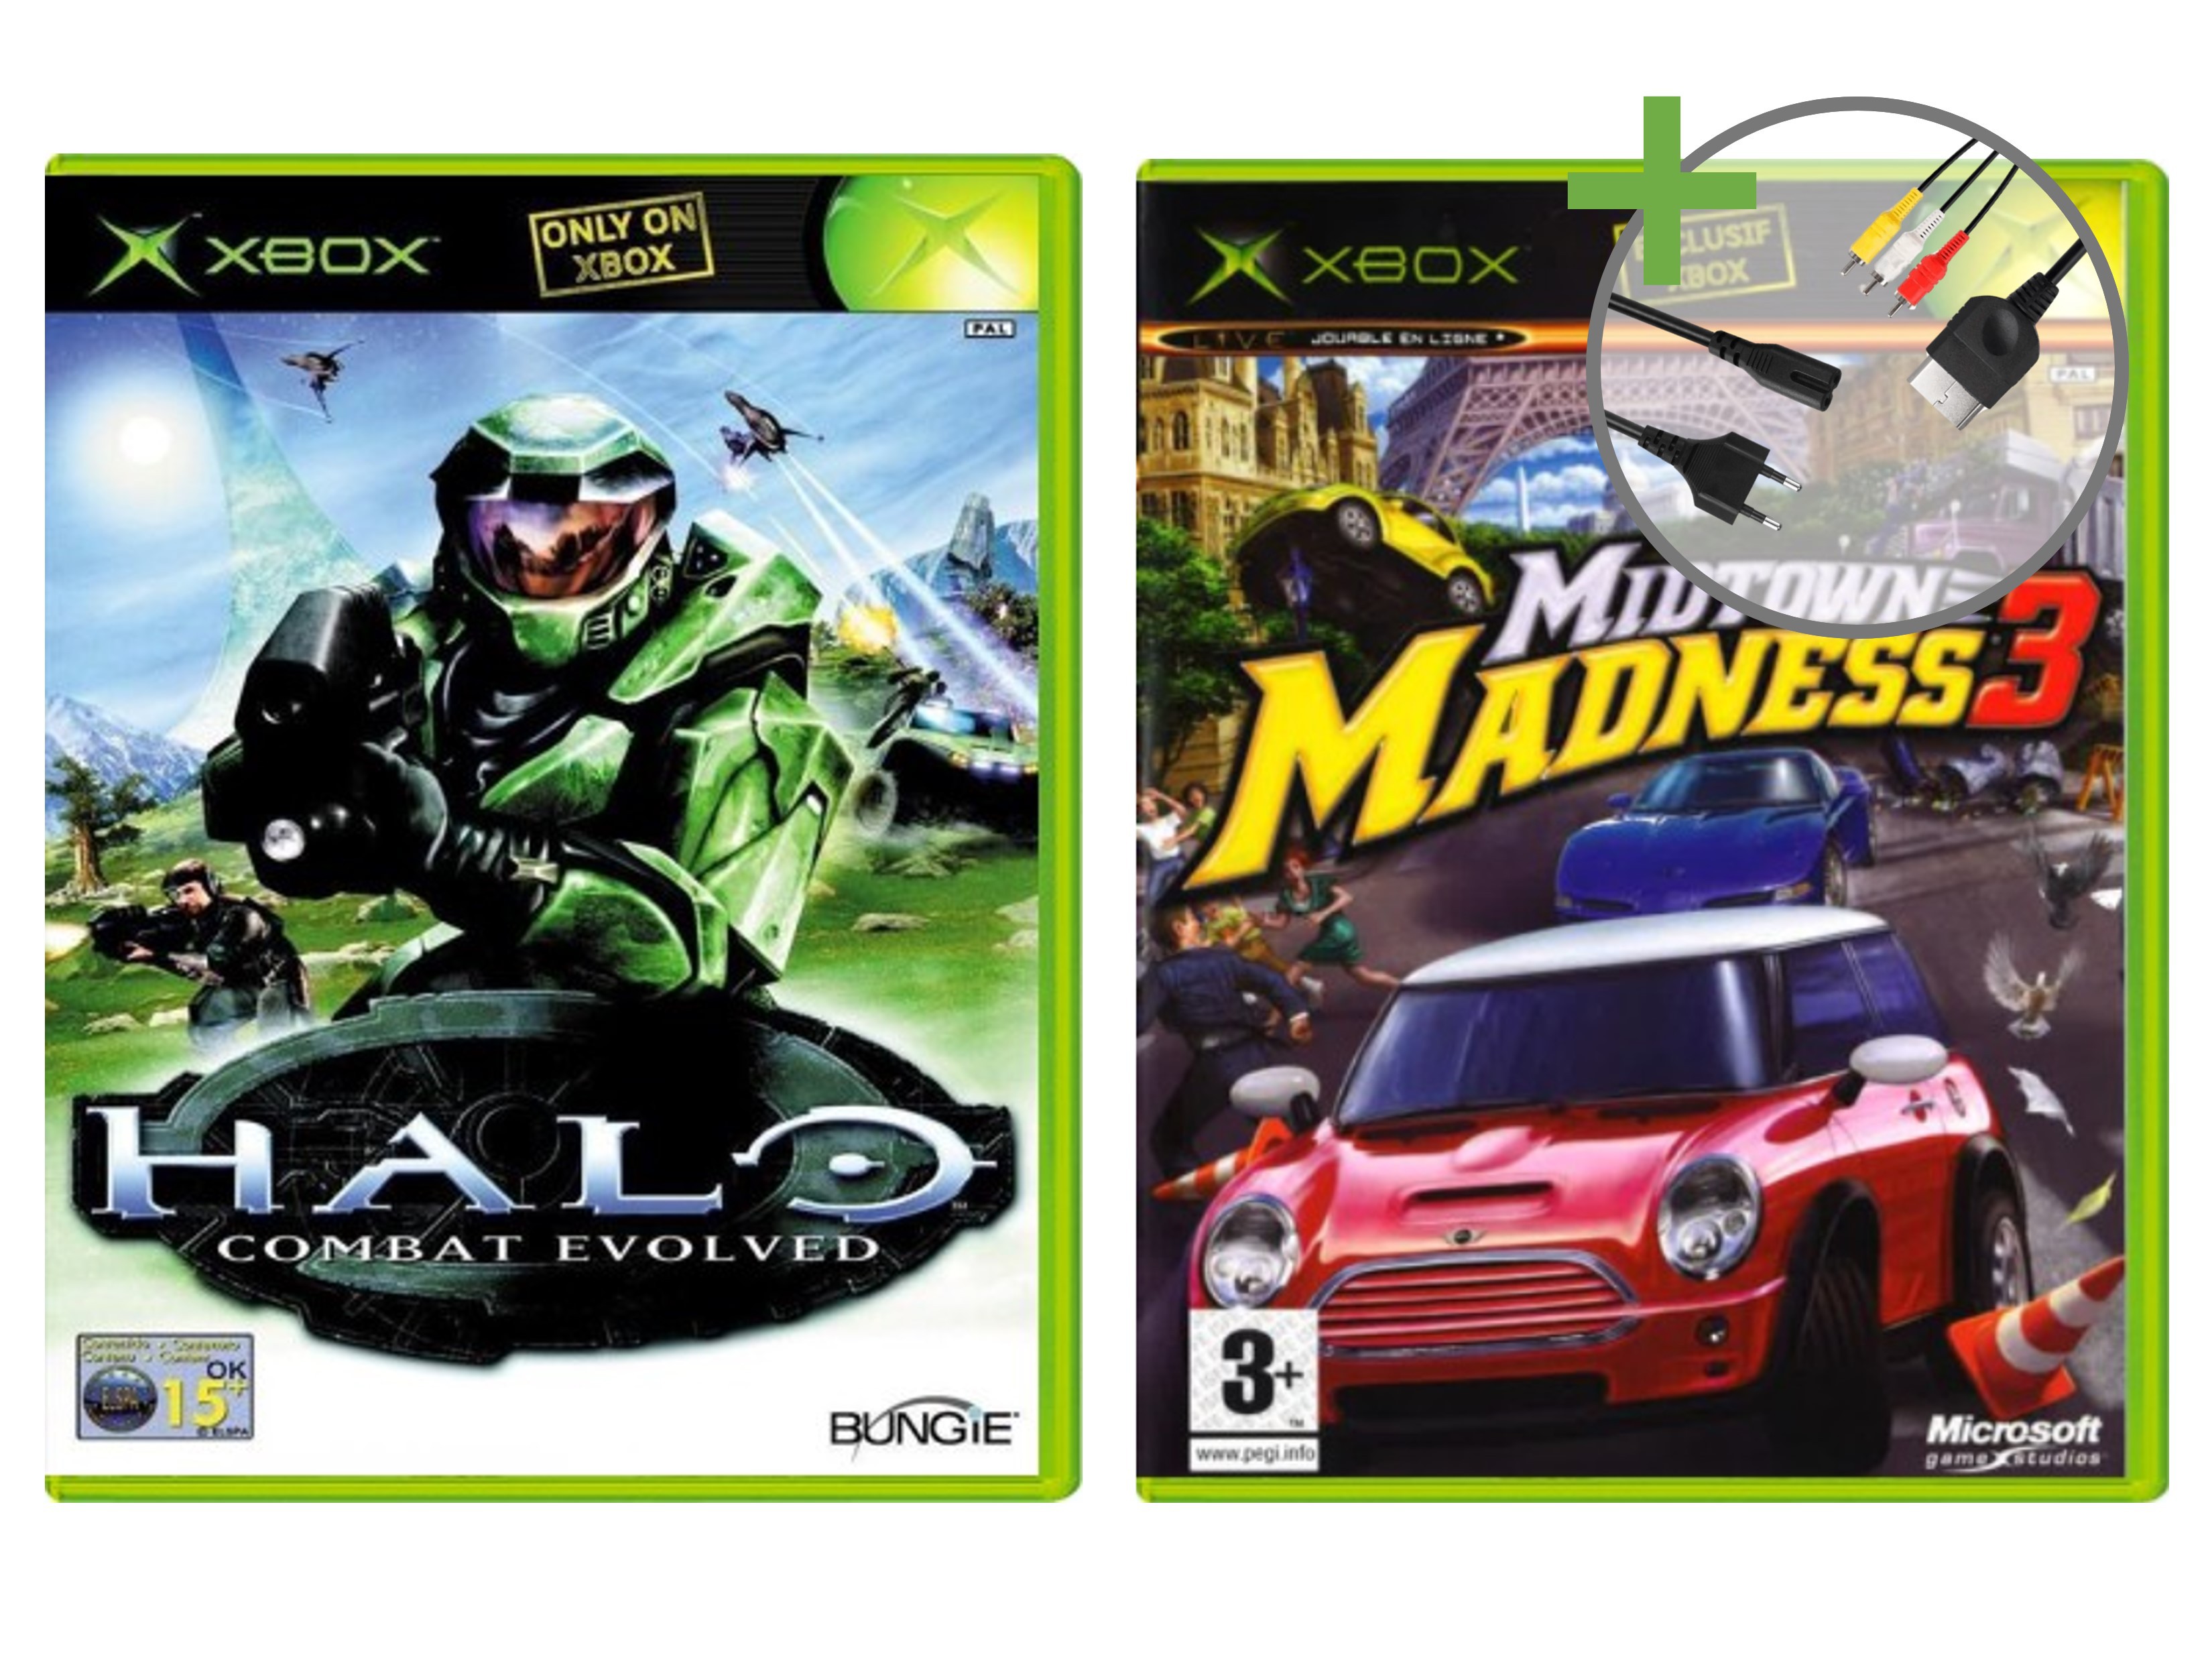 Microsoft Xbox Classic Starter Pack - Halo and Midtown Madness 3 Edition - Xbox Original Hardware - 4